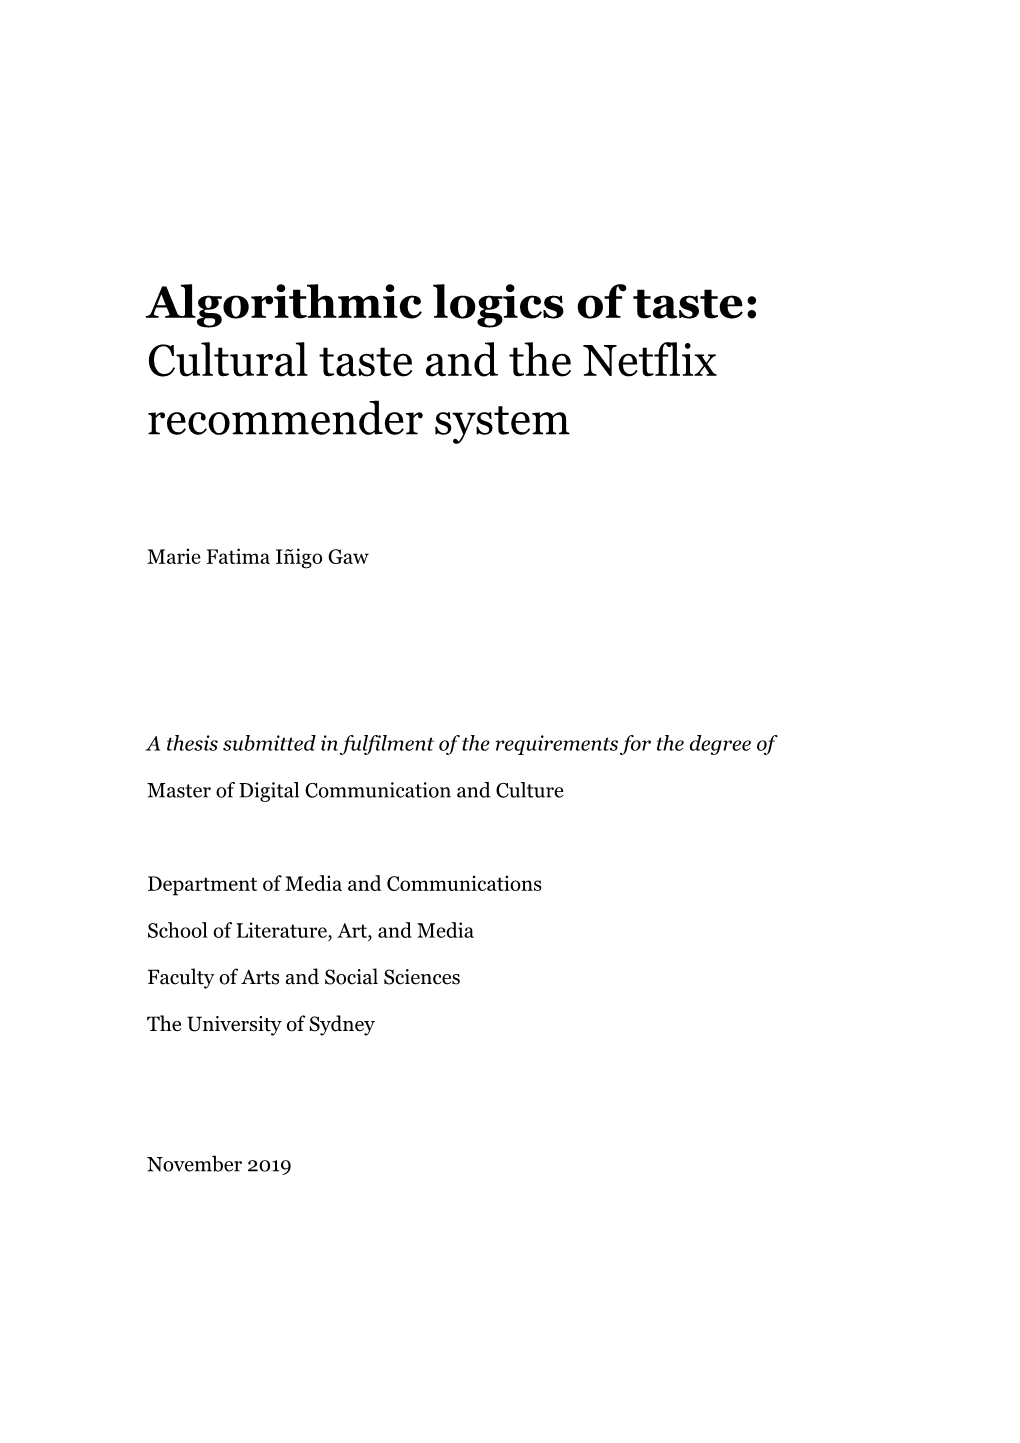 Cultural Taste and the Netflix Recommender System